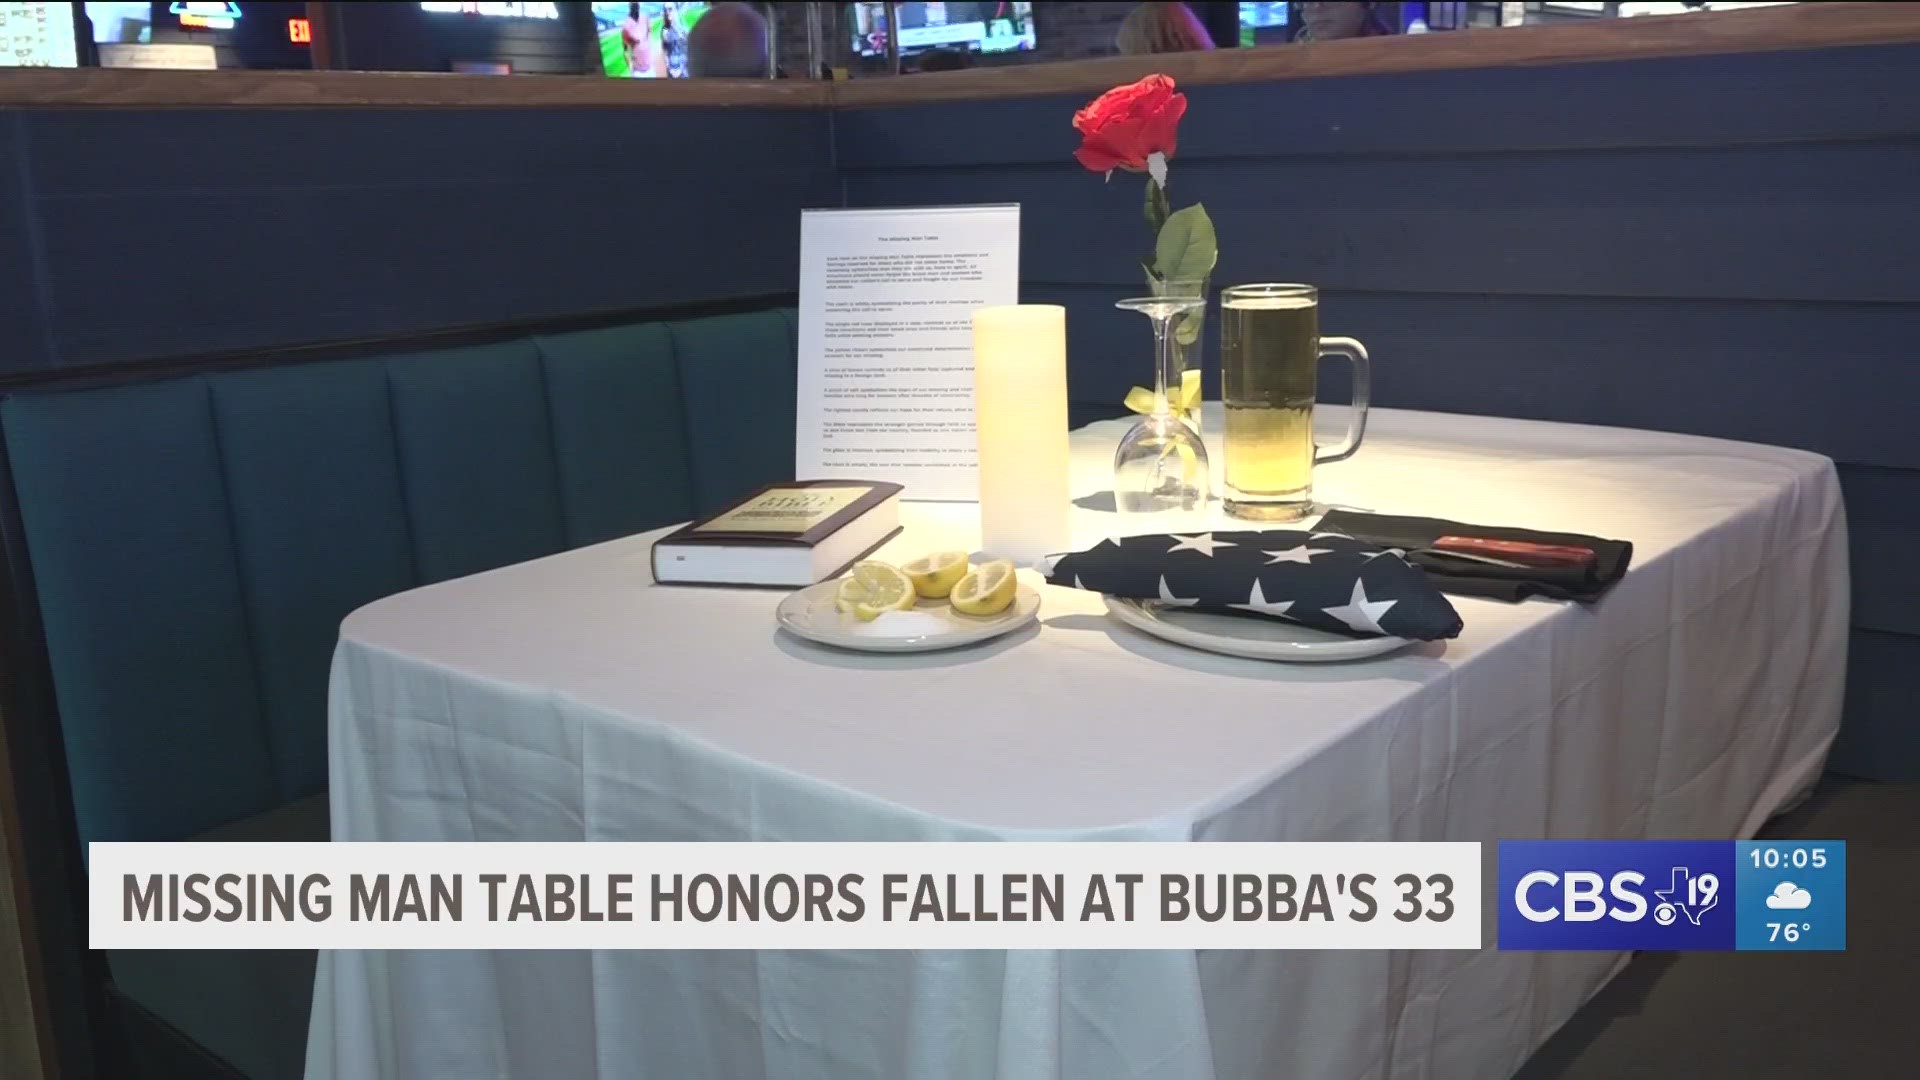 Bubba's 33 in Tyler set up what they called "The Missing Man Table" to honor those who served in the military this Memorial Day weekend.